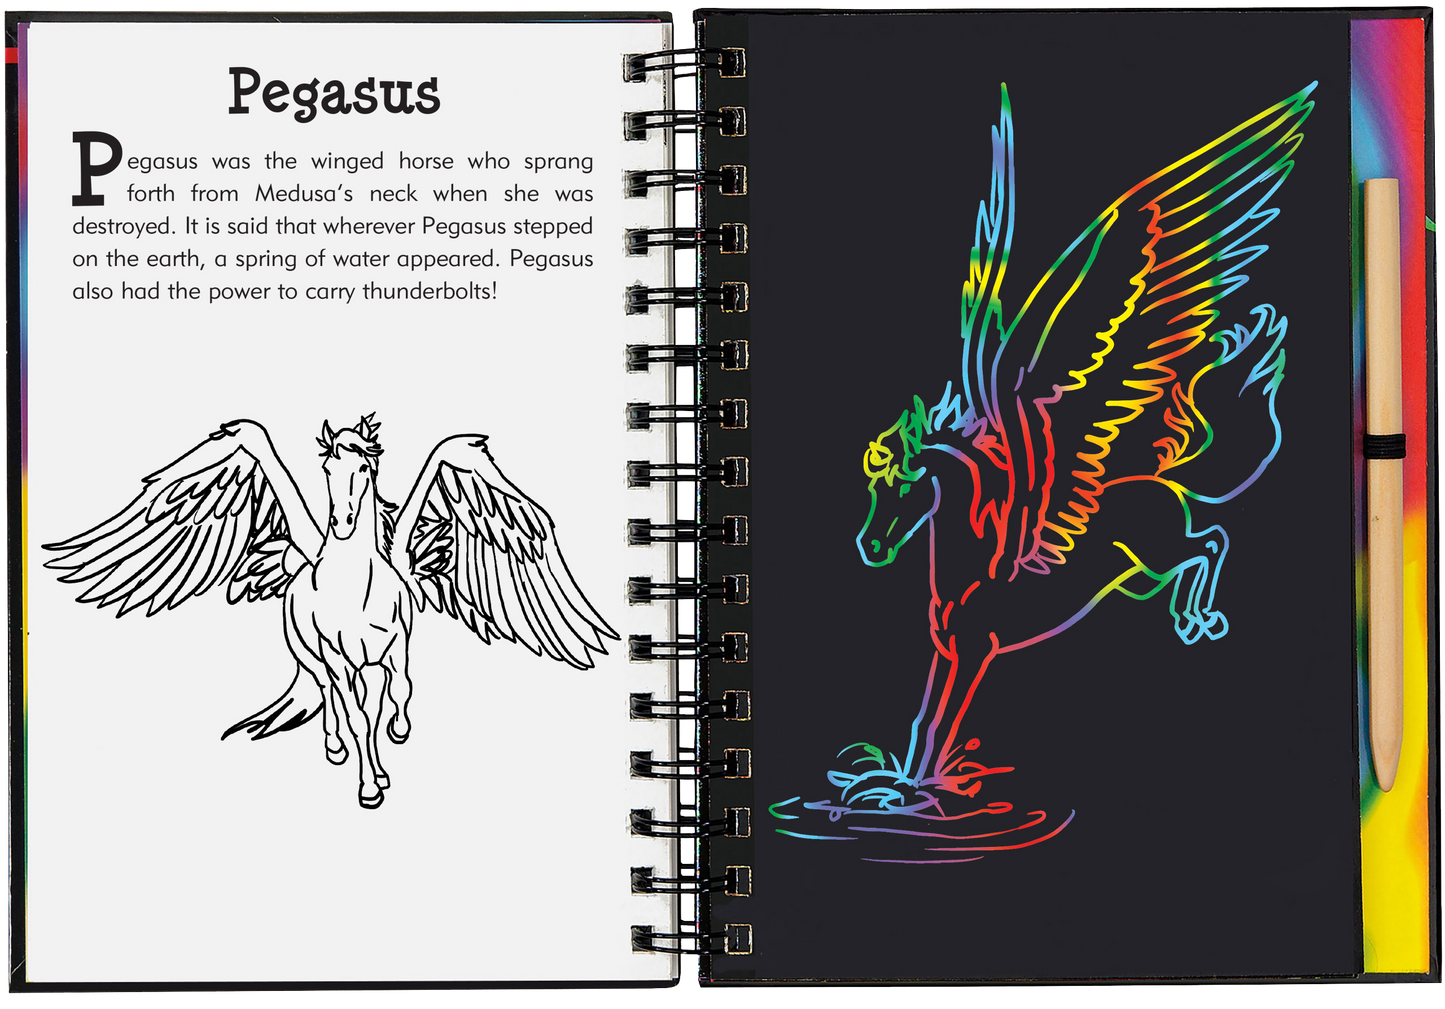 Scratch & Sketch Dragons & Mythical Creatures